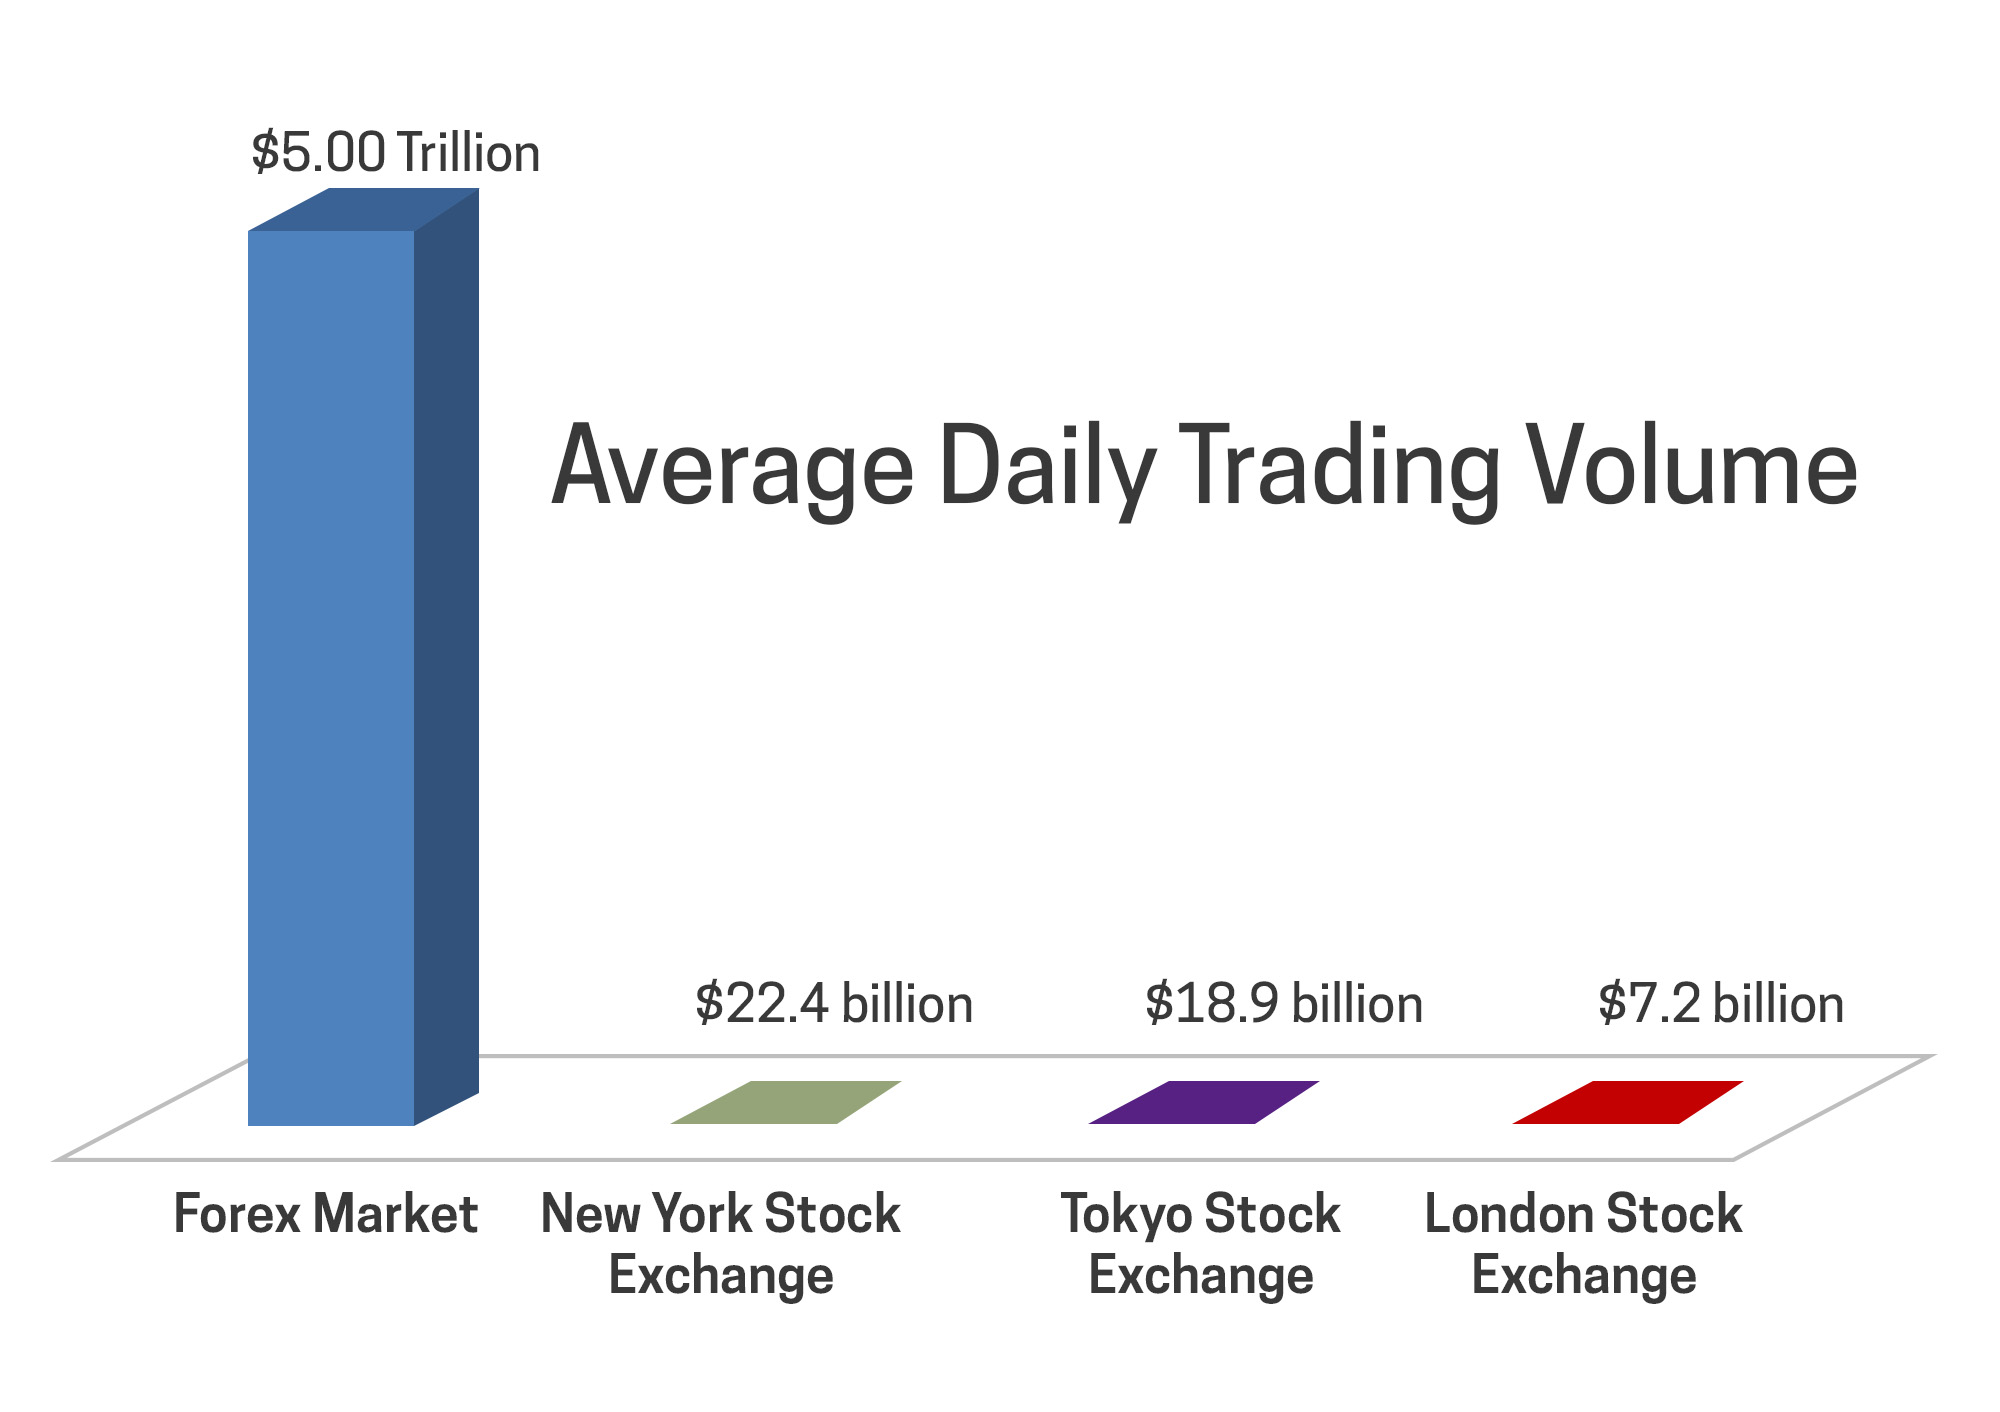 How much forex is traded daily